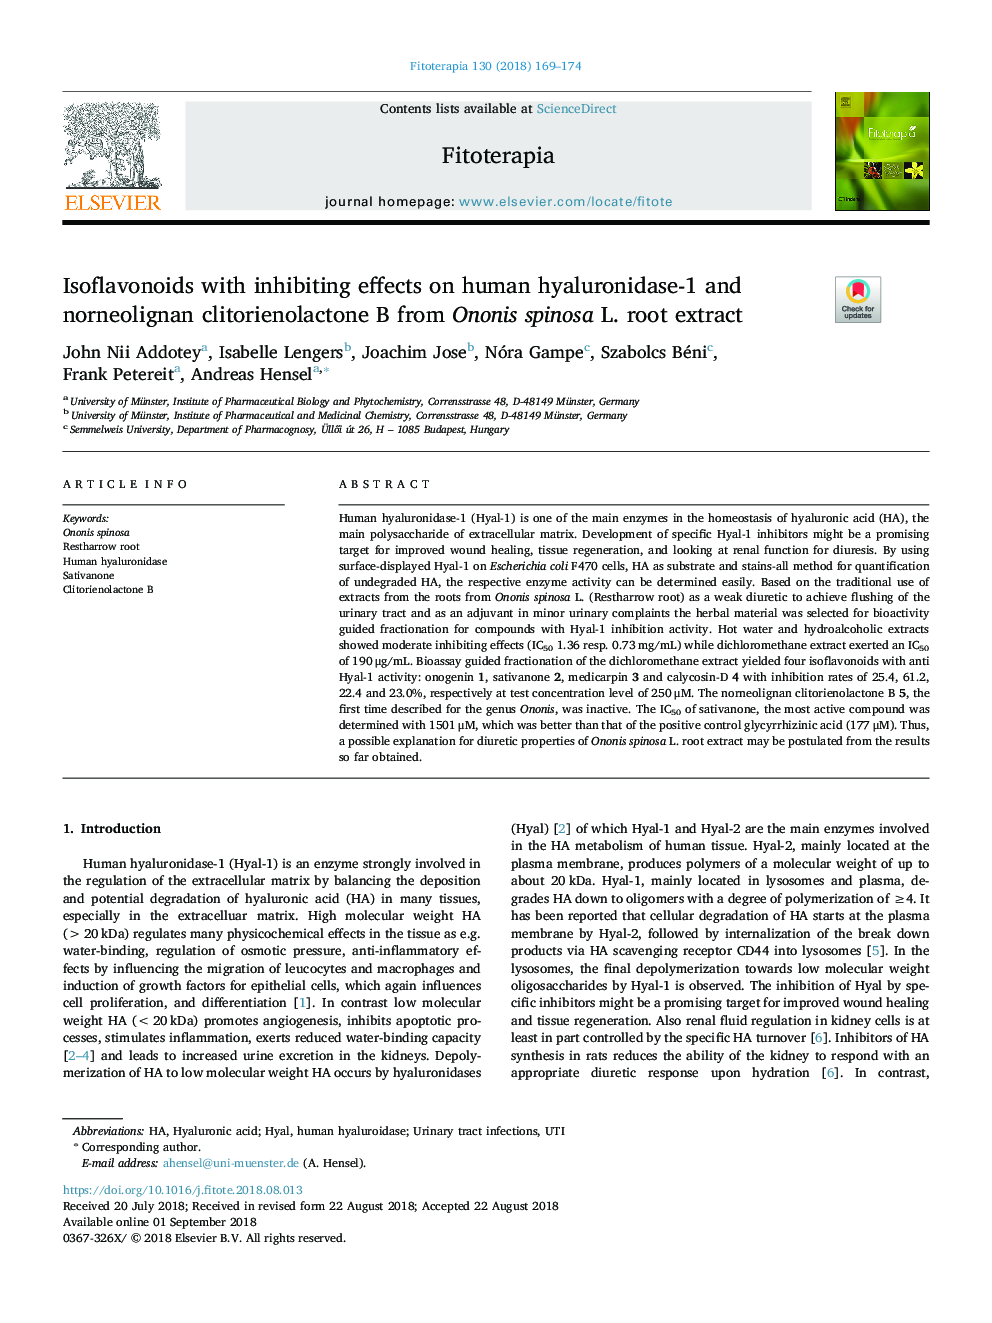 Isoflavonoids with inhibiting effects on human hyaluronidase-1 and norneolignan clitorienolactone B from Ononis spinosa L. root extract